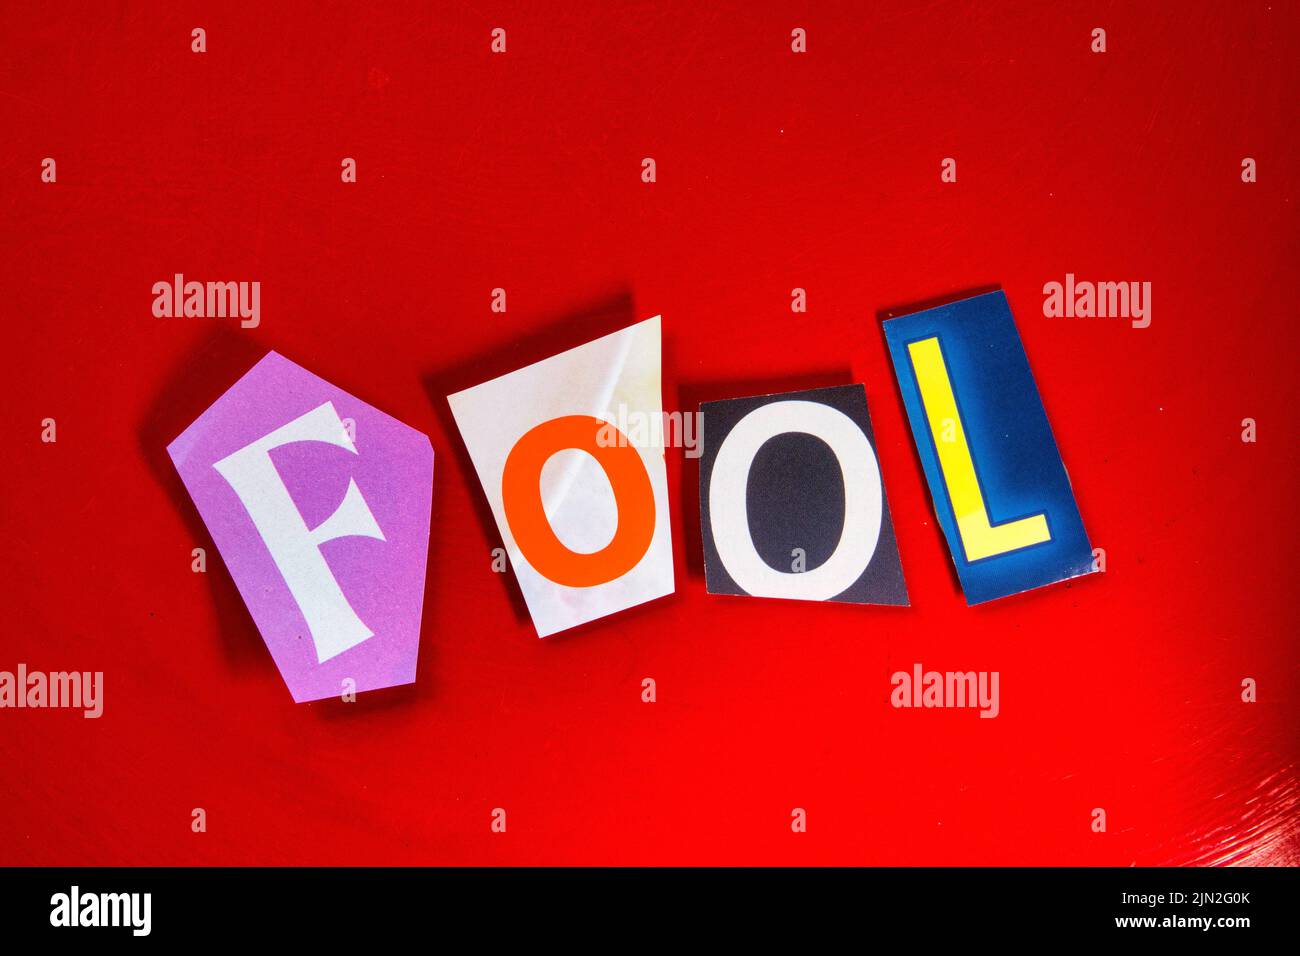 The word 'Fool' using cut-out paper letters in the ransom note effect typography Stock Photo